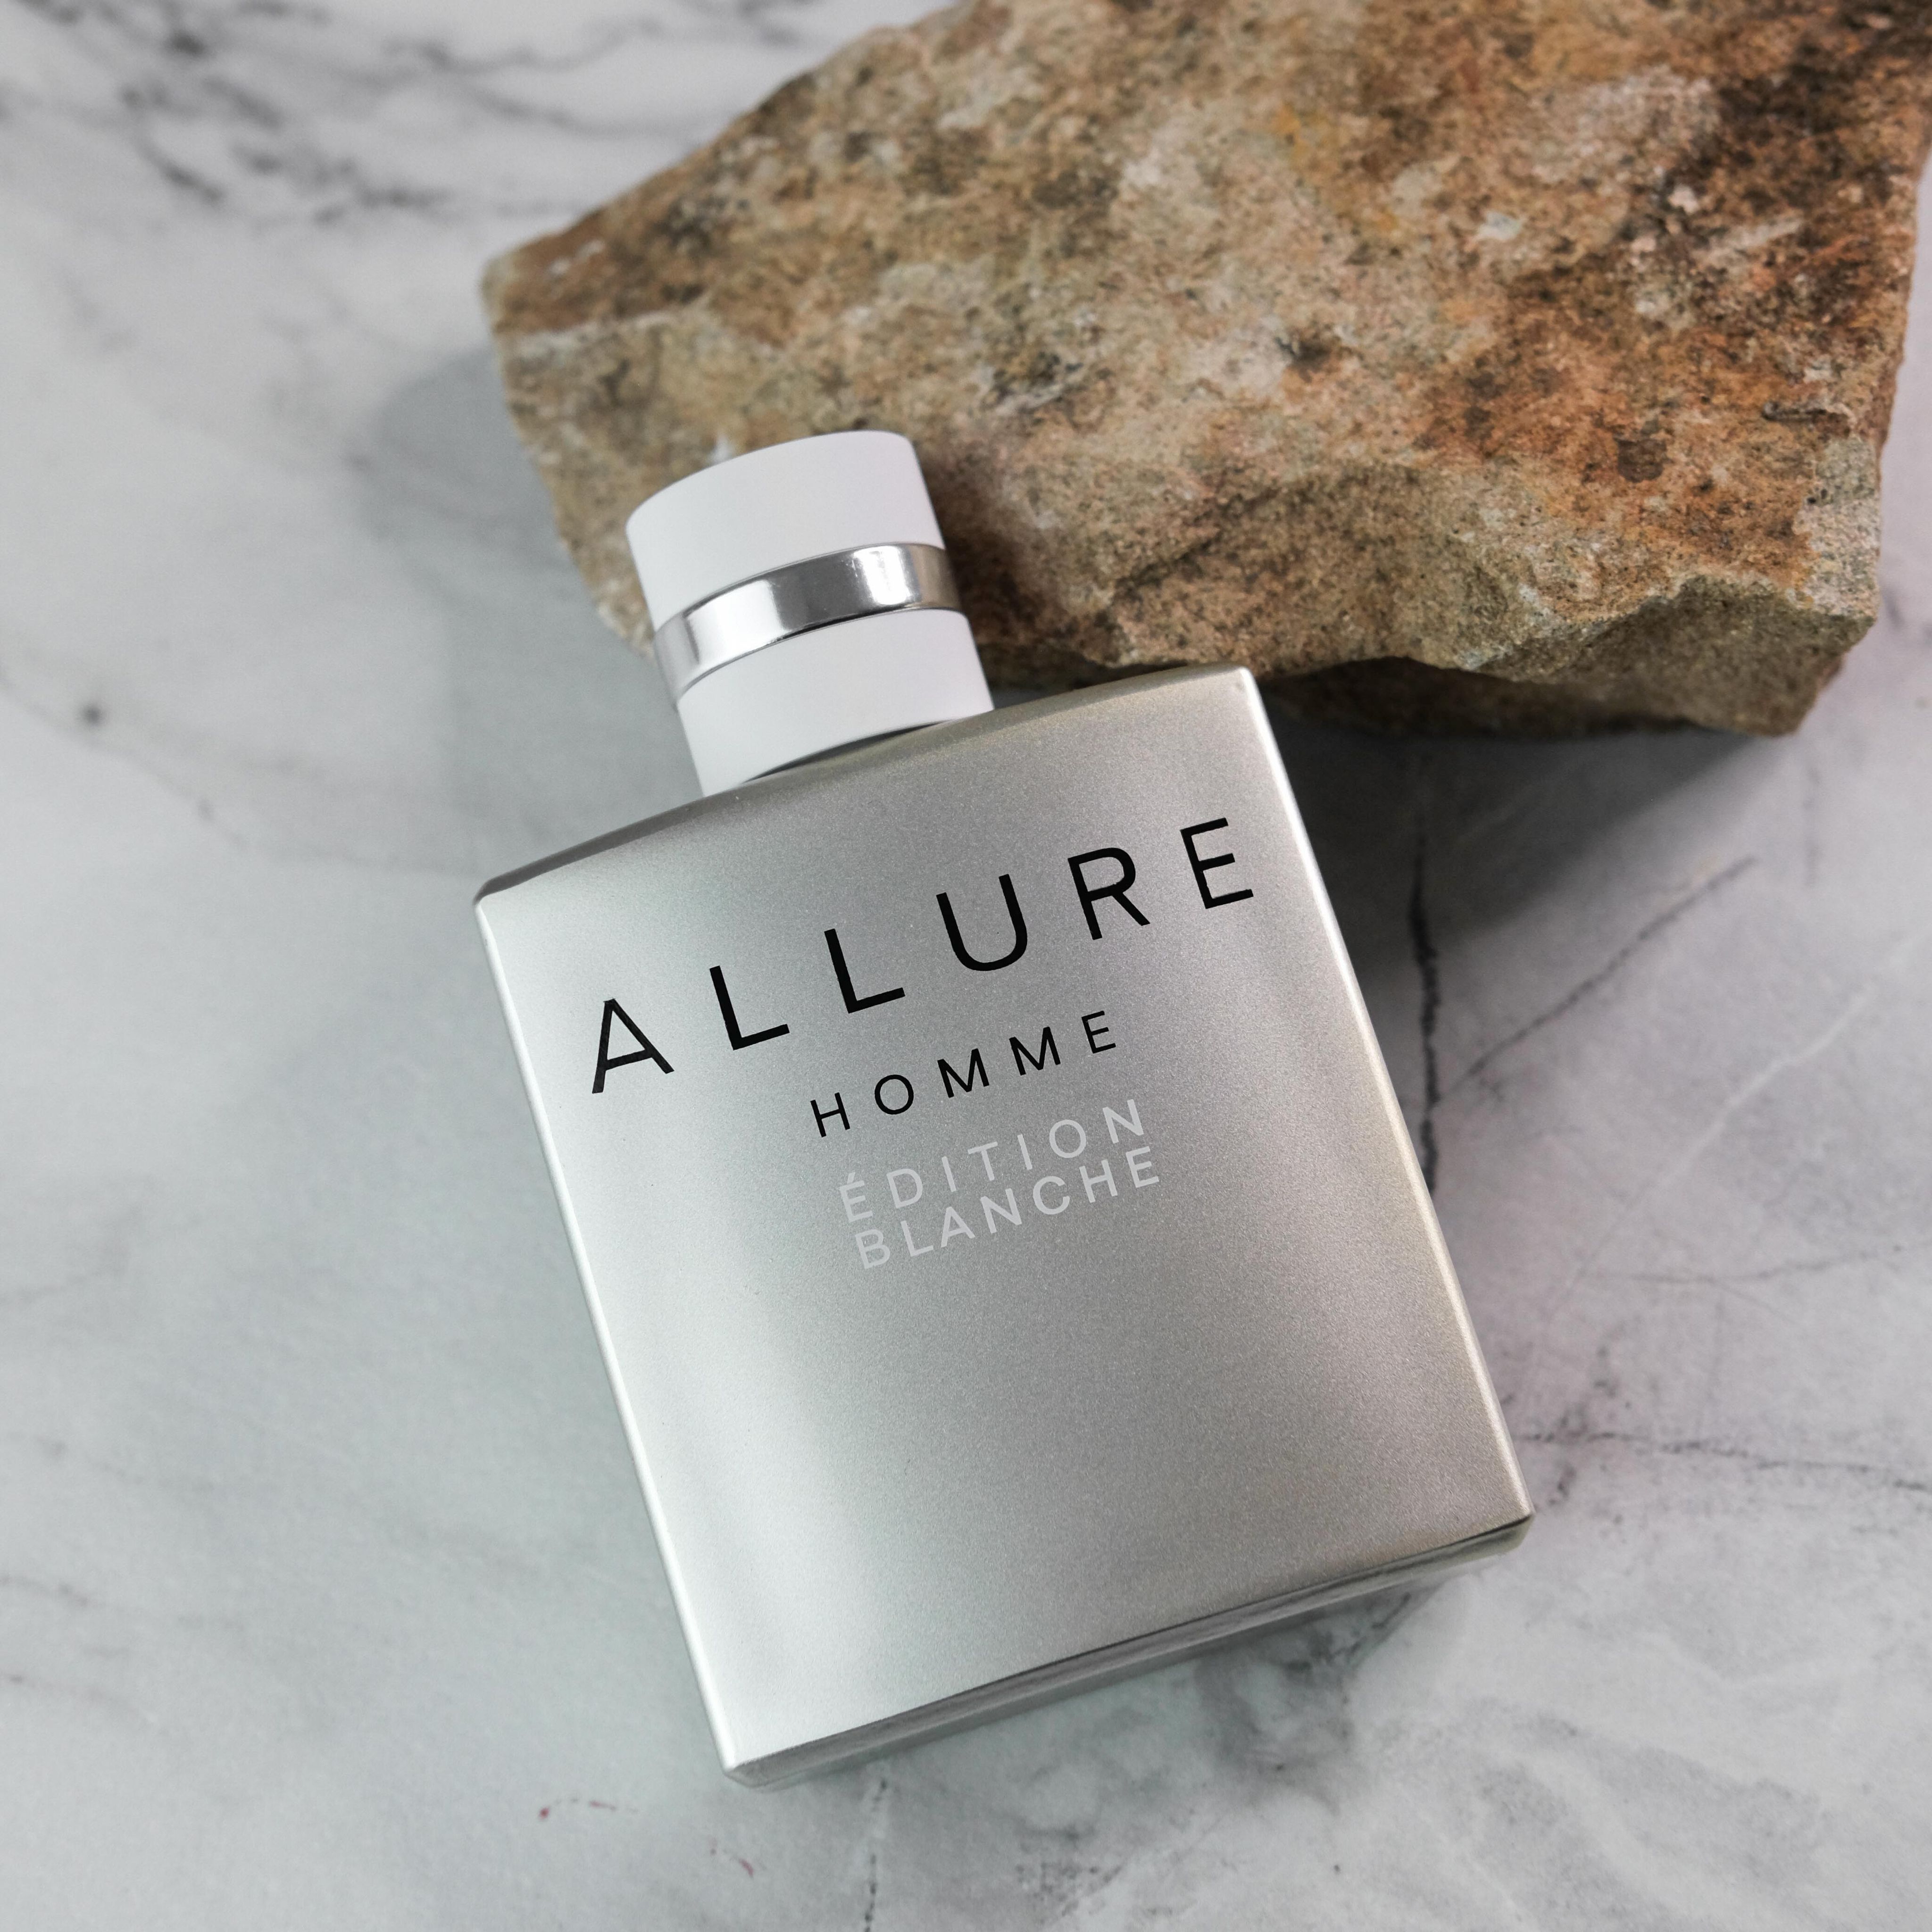 Chanel homme edition blanche. Chanel мужские. Allure homme Edition Blanche 150ml. Chanel мужс. Allure homme Edition Blanche 150 ml. Chanel мужские. Allure homme Edition Blanche. Chanel Allure Edition Blance.